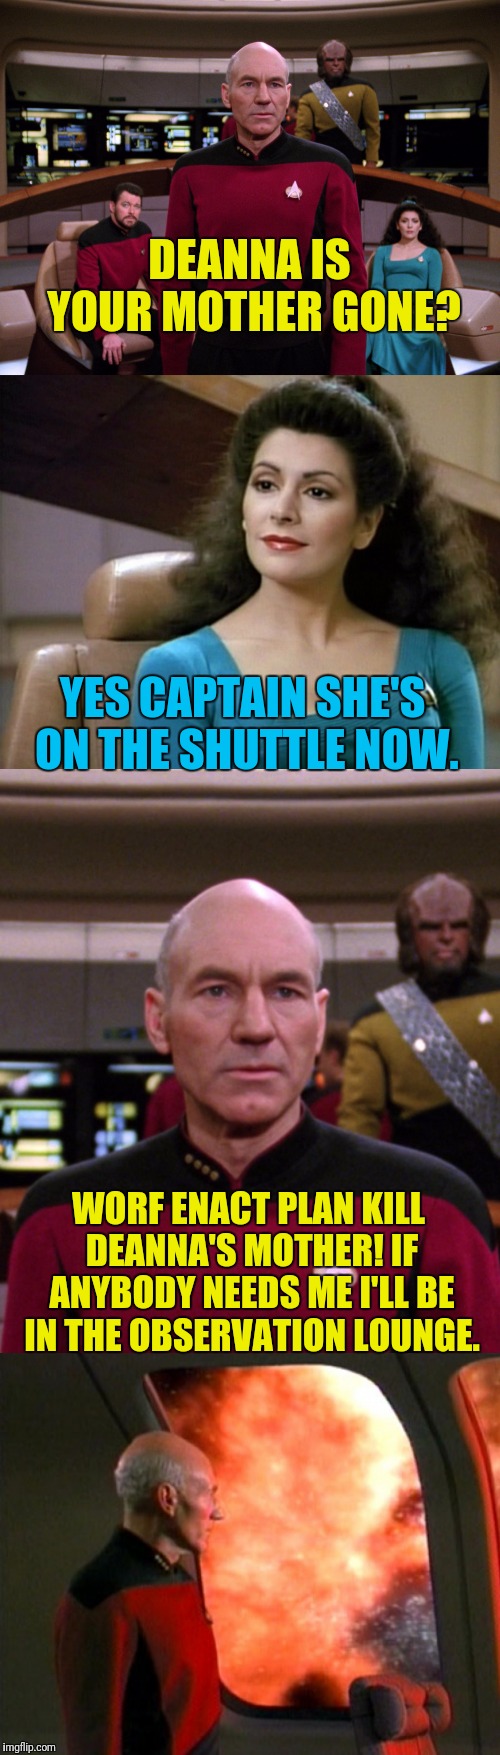 Picards Bad At Naming Plans | DEANNA IS YOUR MOTHER GONE? YES CAPTAIN SHE'S ON THE SHUTTLE NOW. WORF ENACT PLAN KILL DEANNA'S MOTHER! IF ANYBODY NEEDS ME I'LL BE IN THE OBSERVATION LOUNGE. | image tagged in star trek the next generation,picard,deanna troi,lieutenant worf,plans | made w/ Imgflip meme maker